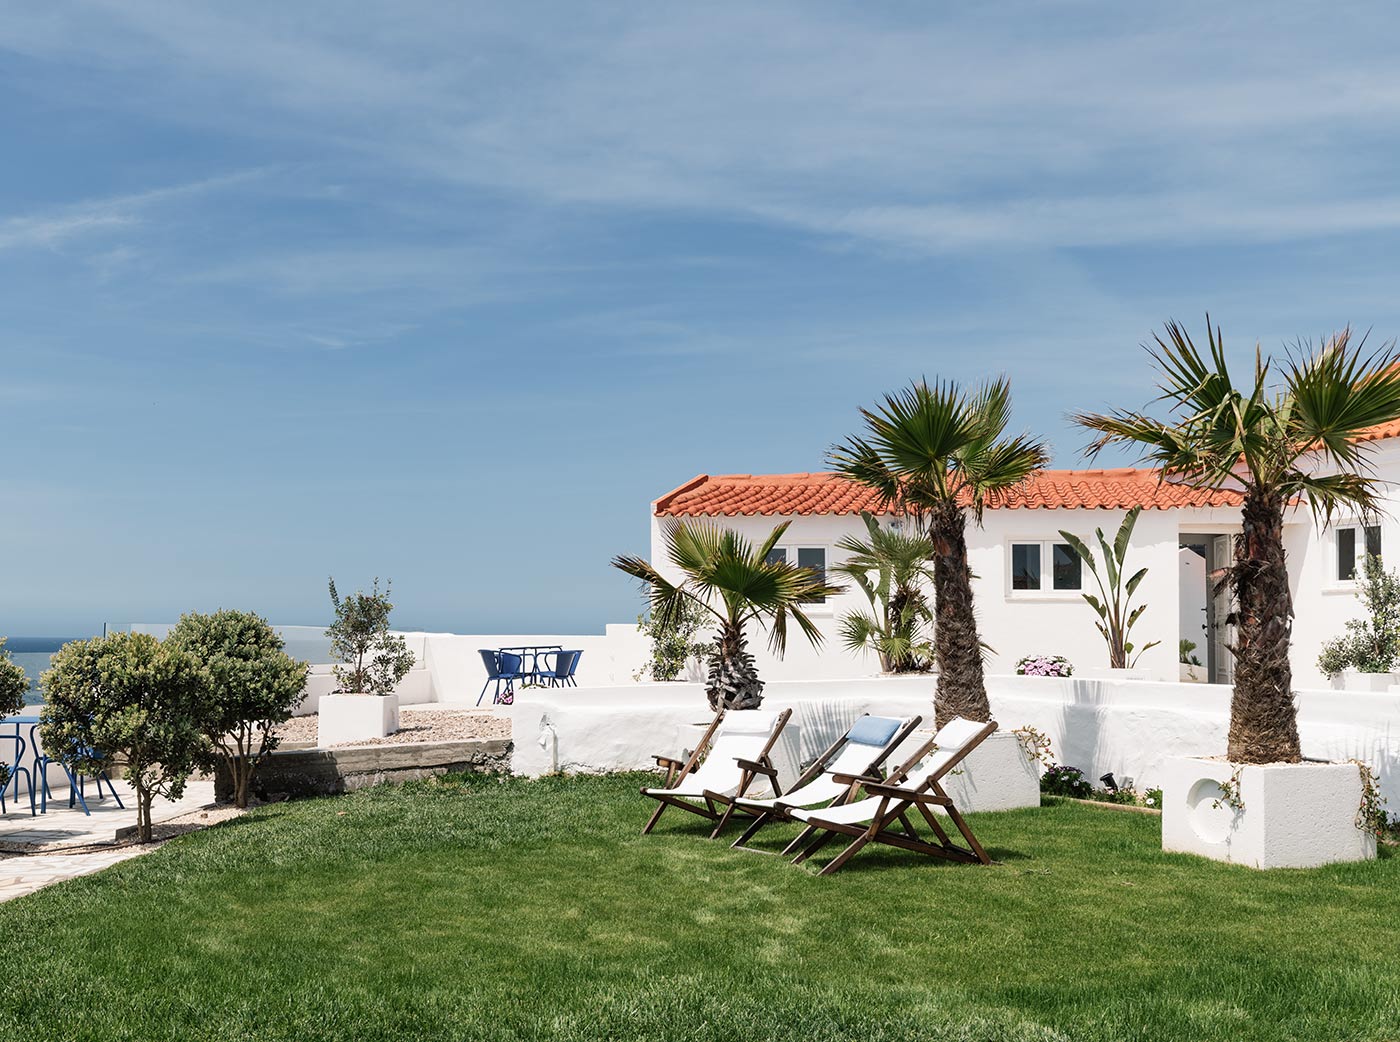 Pretty Hotels: Outpost Ocean Casitas (Image 1)